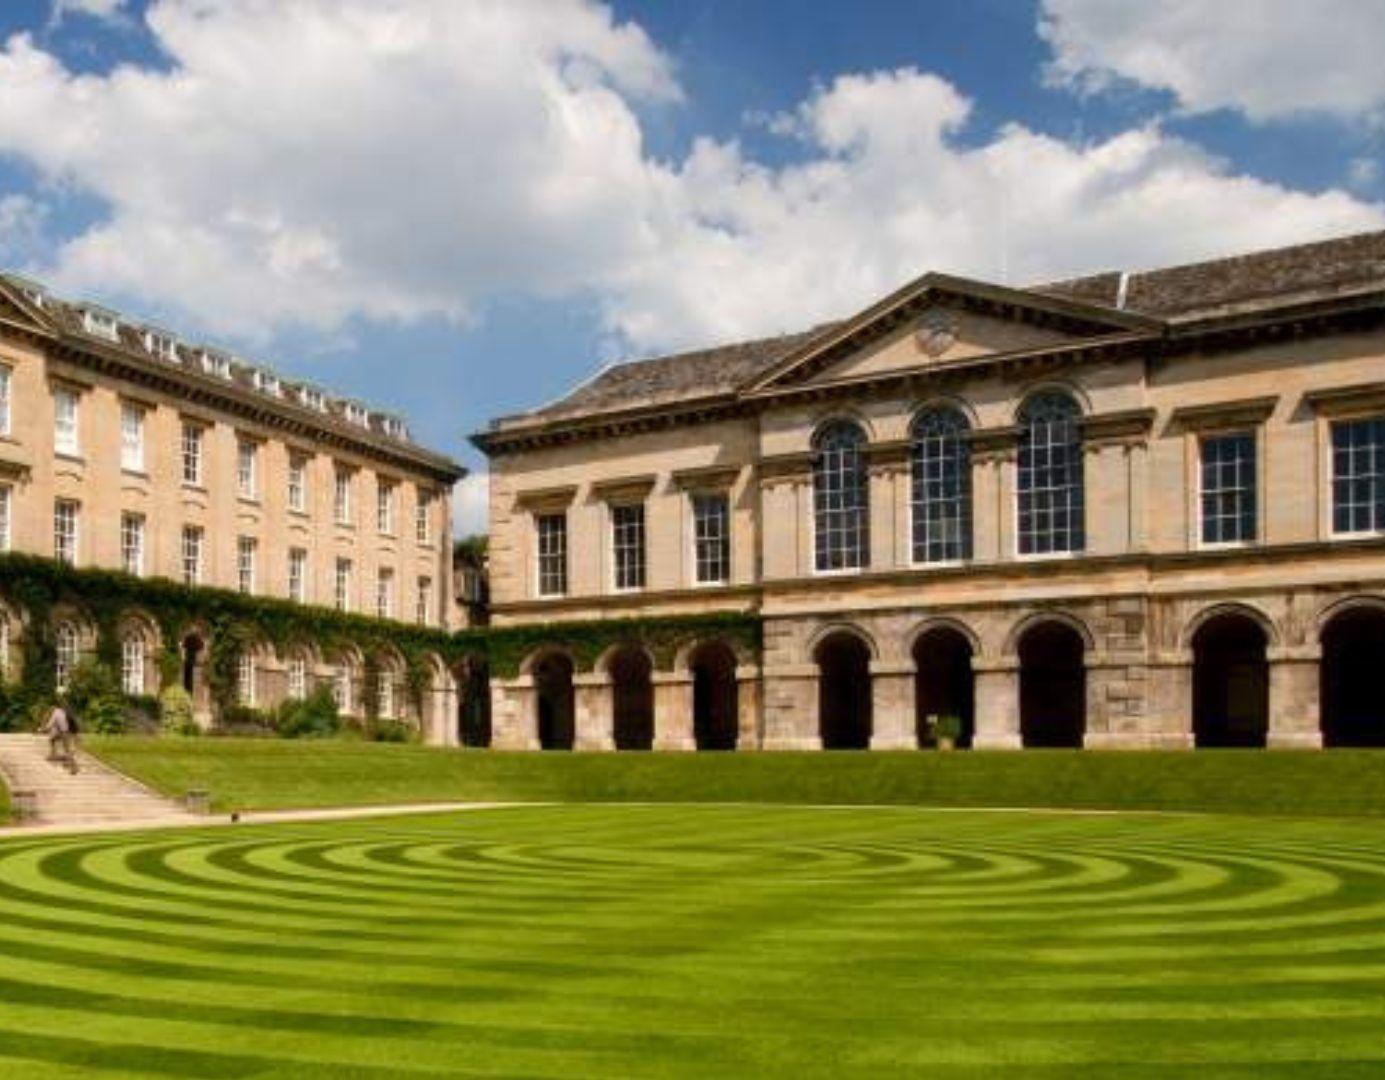 The quad and surrounding buildings of Oxford University's Worcester College are bathed in light